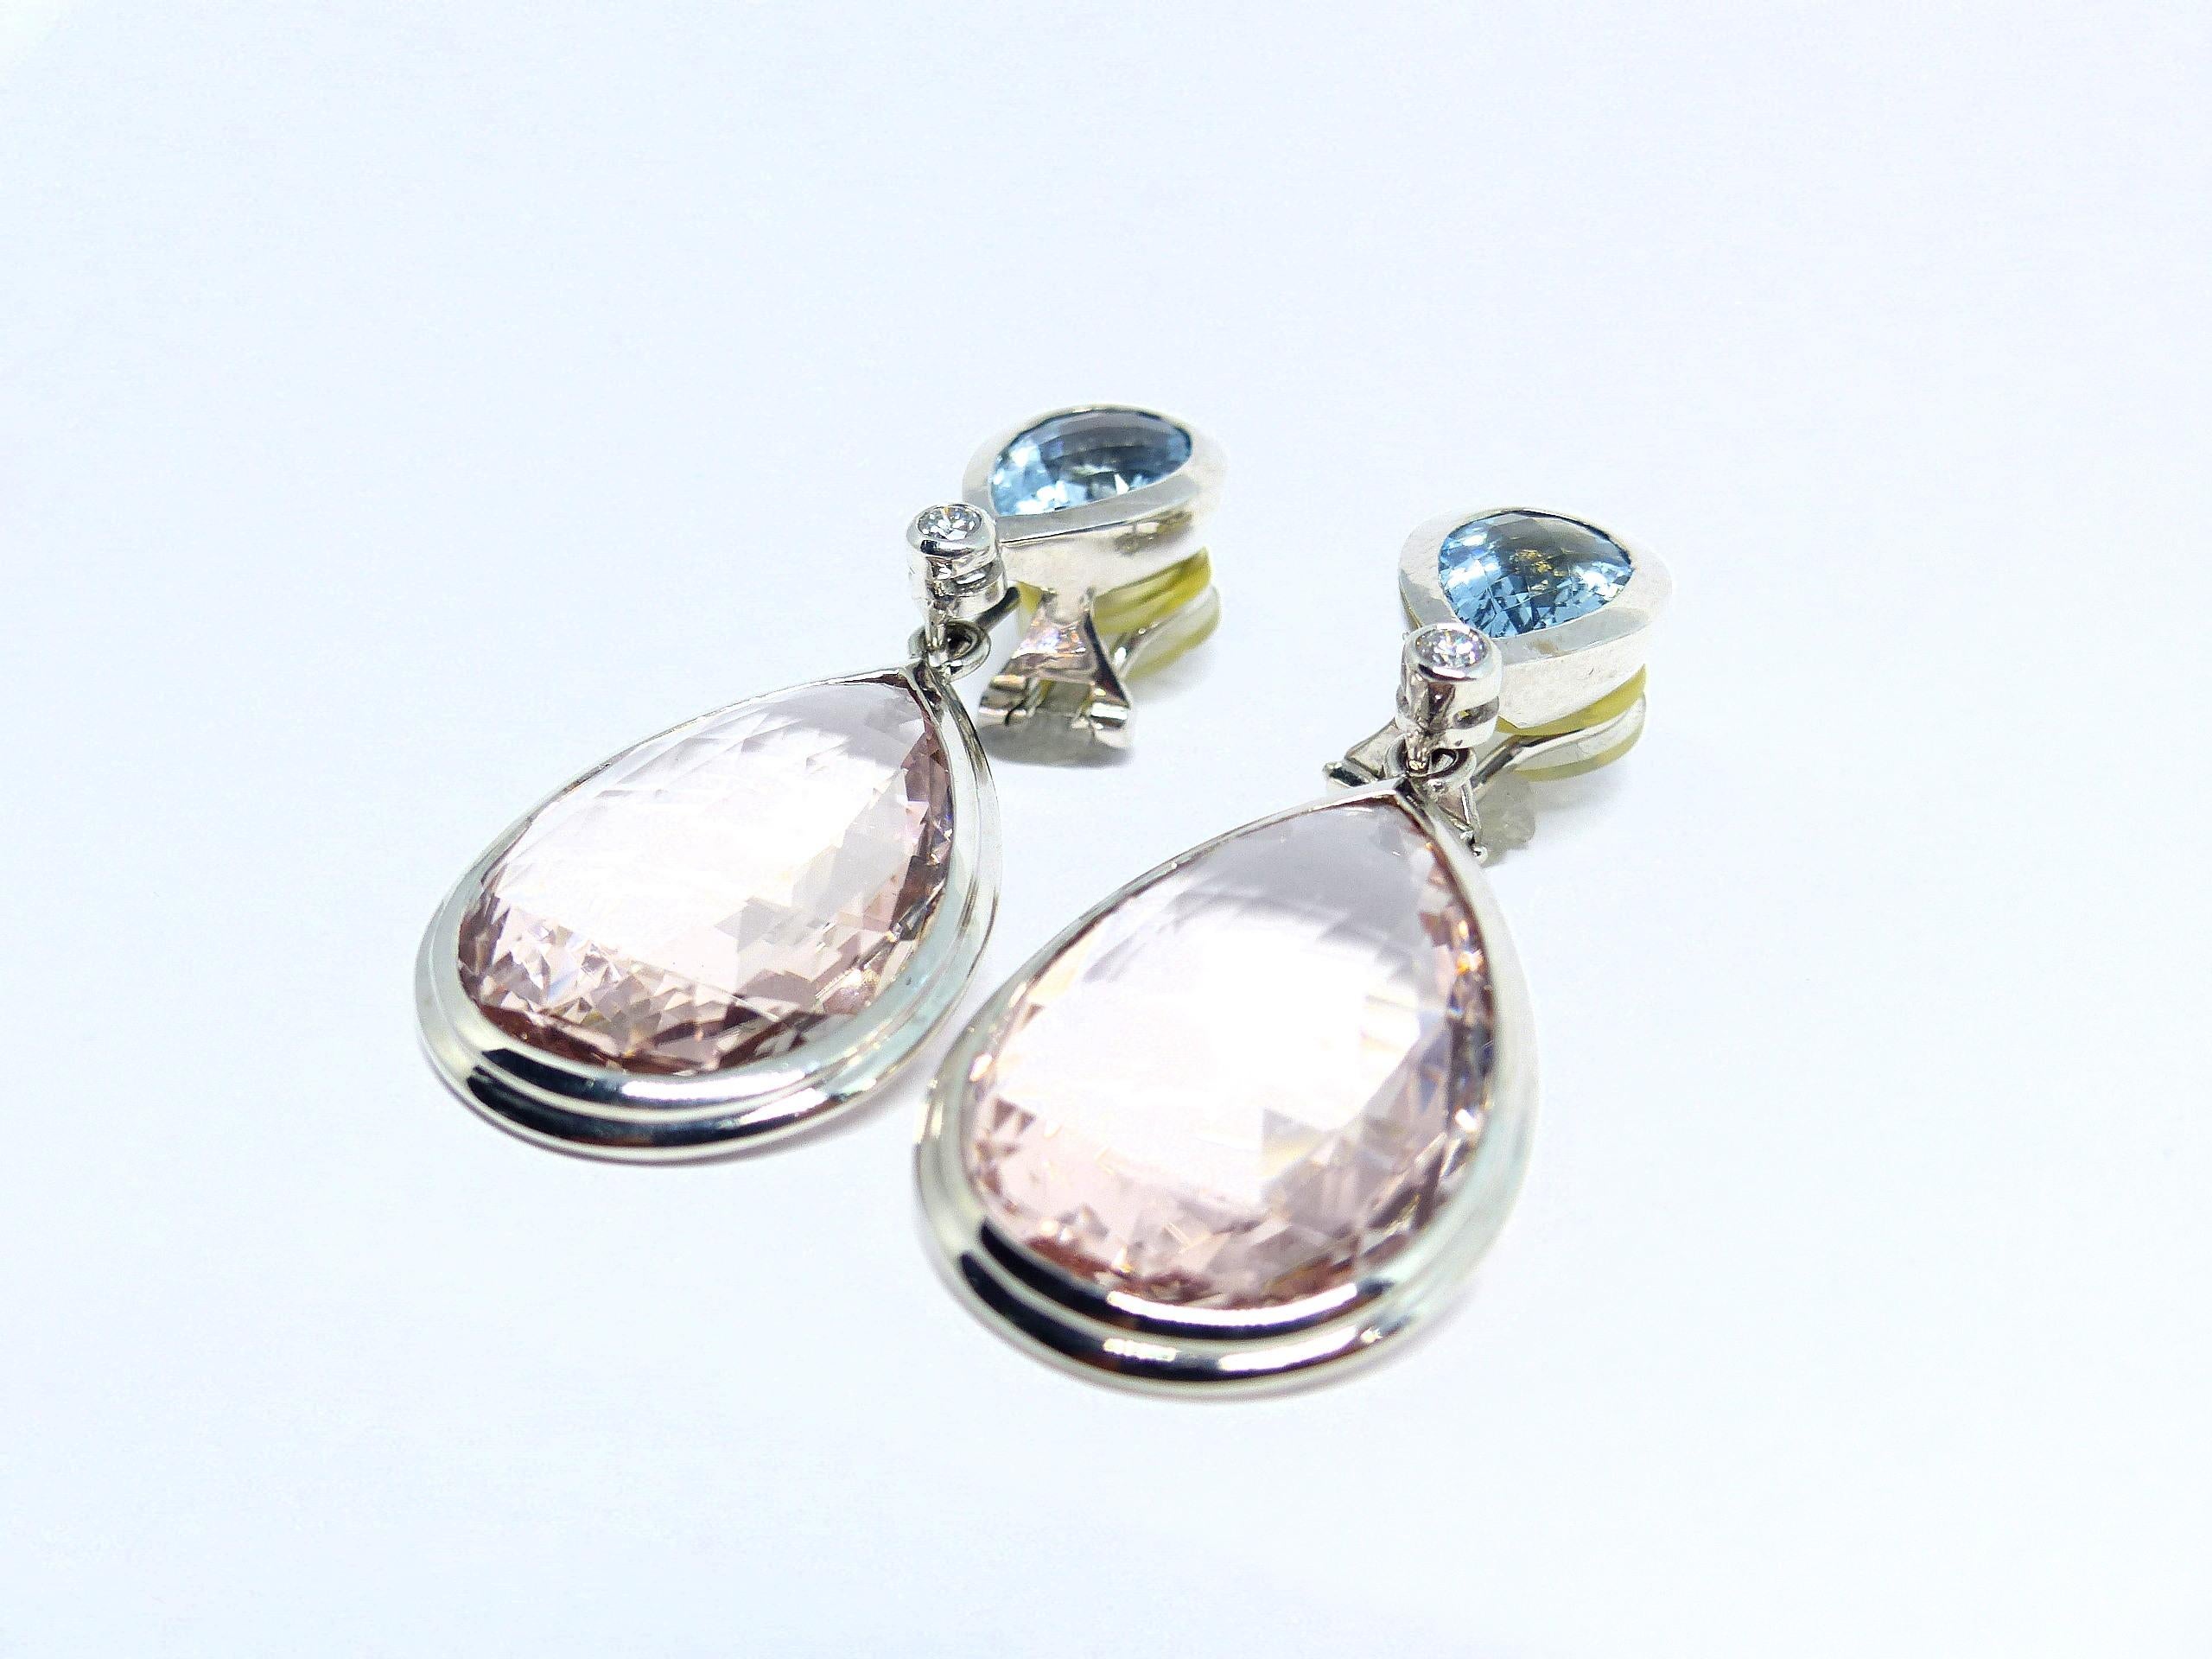 Thomas Leyser is renowned for his contemporary jewellery designs utilizing fine gemstones.

These 18k White Gold (25.96g) Pair of Earings are set with 2x fine Aquamarine (pear-shape, 12x8mm, 4,70ct) + 2x fine Morganite (briolette-cut, 25x17,5mm,